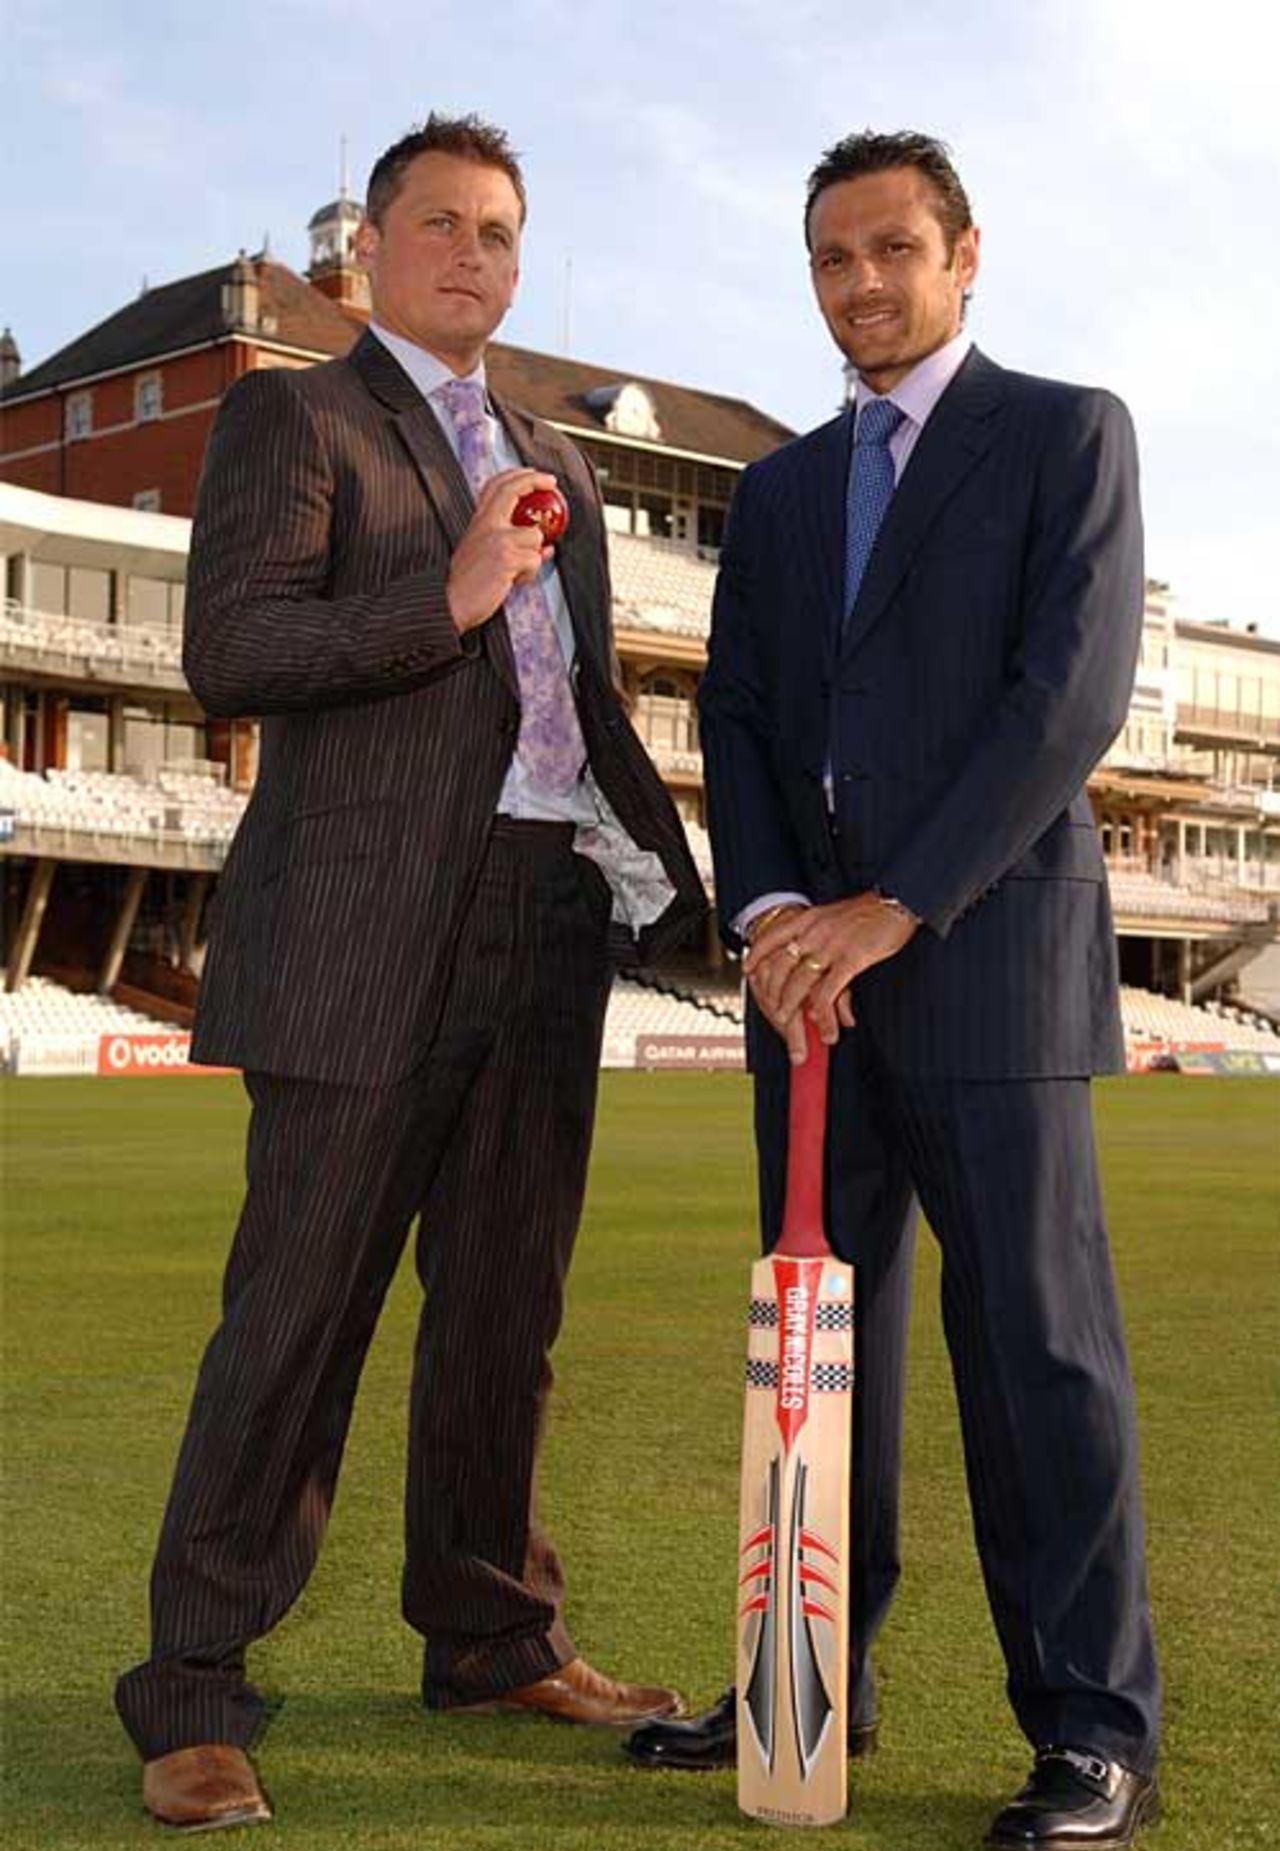 Pair of winners: Darren Gough and Mark Ramprakash face each other - but on the pitch, not the dancefloor, as Yorkshire take on Surrey at the Oval, 18 April, 2007